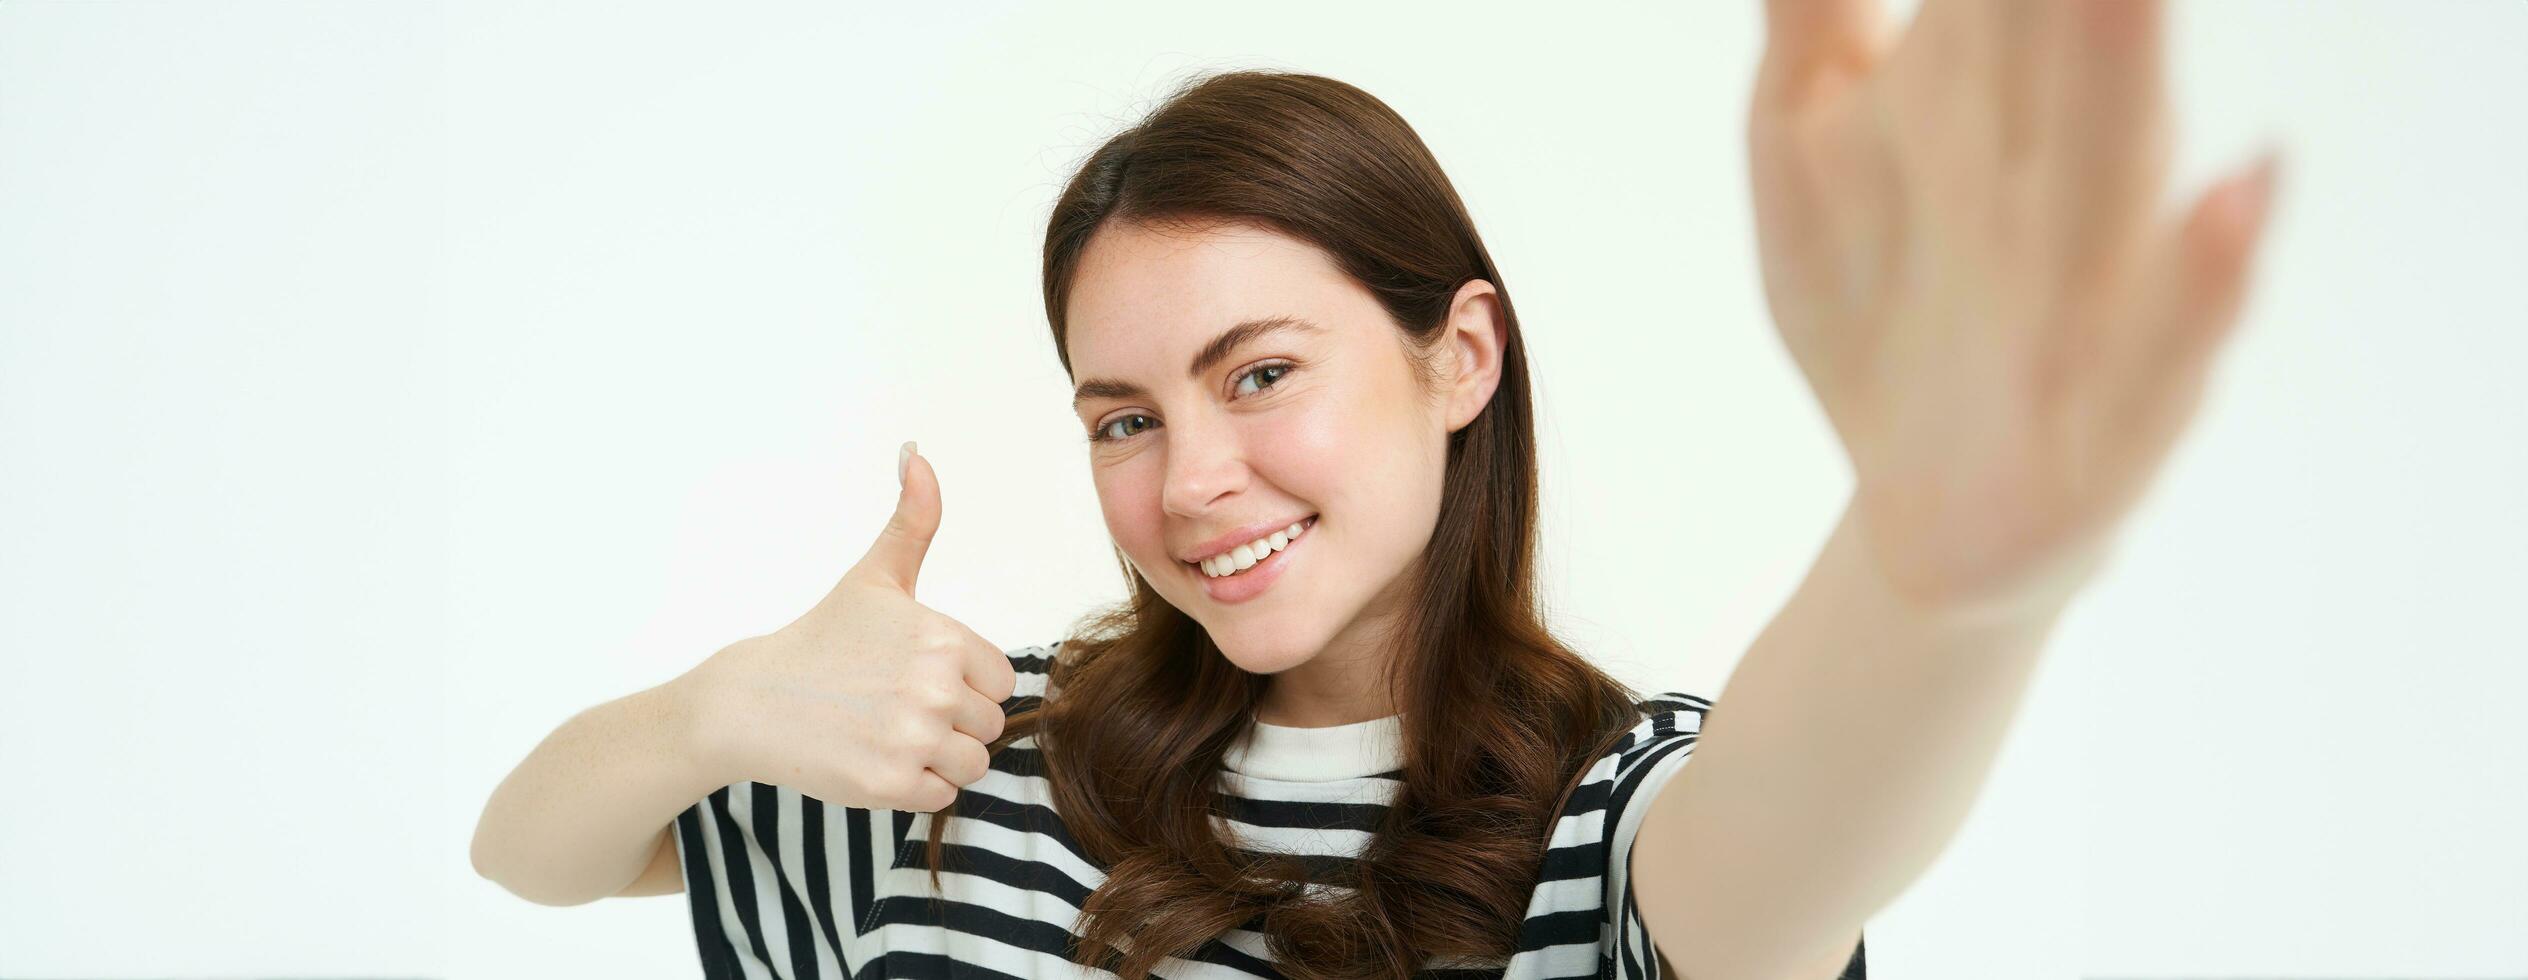 Portrait of girl takes selfie with thumbs up next to something she recommends, likes and approves, stands over white background photo